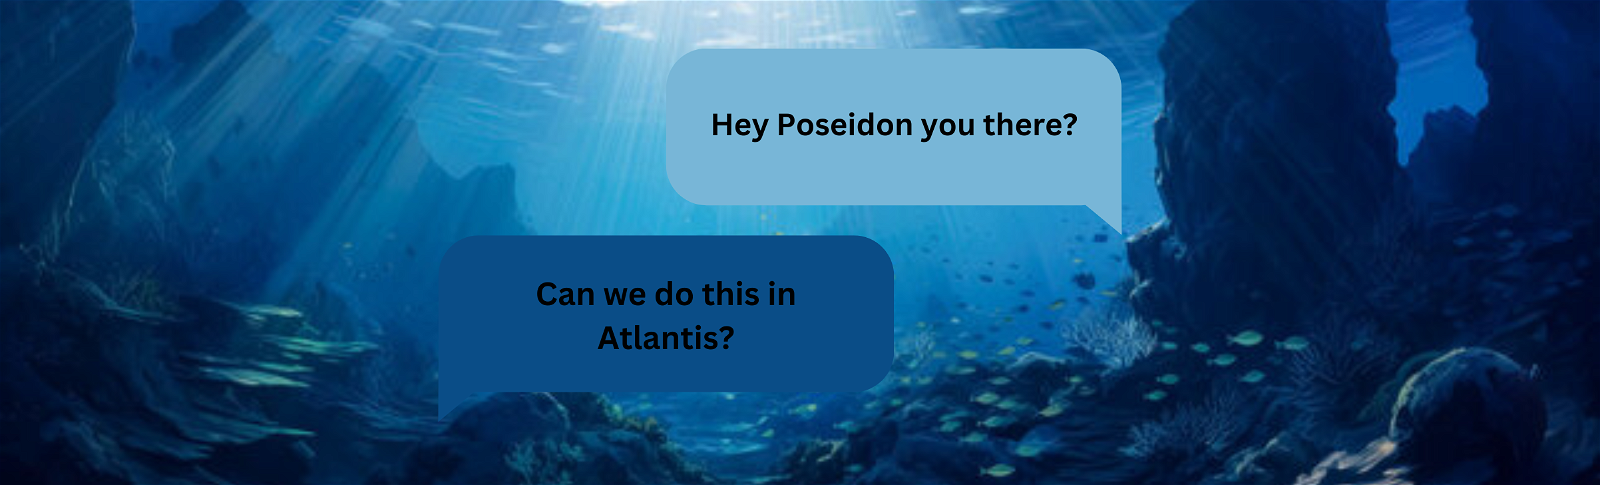 Interview with a God: Poseidon